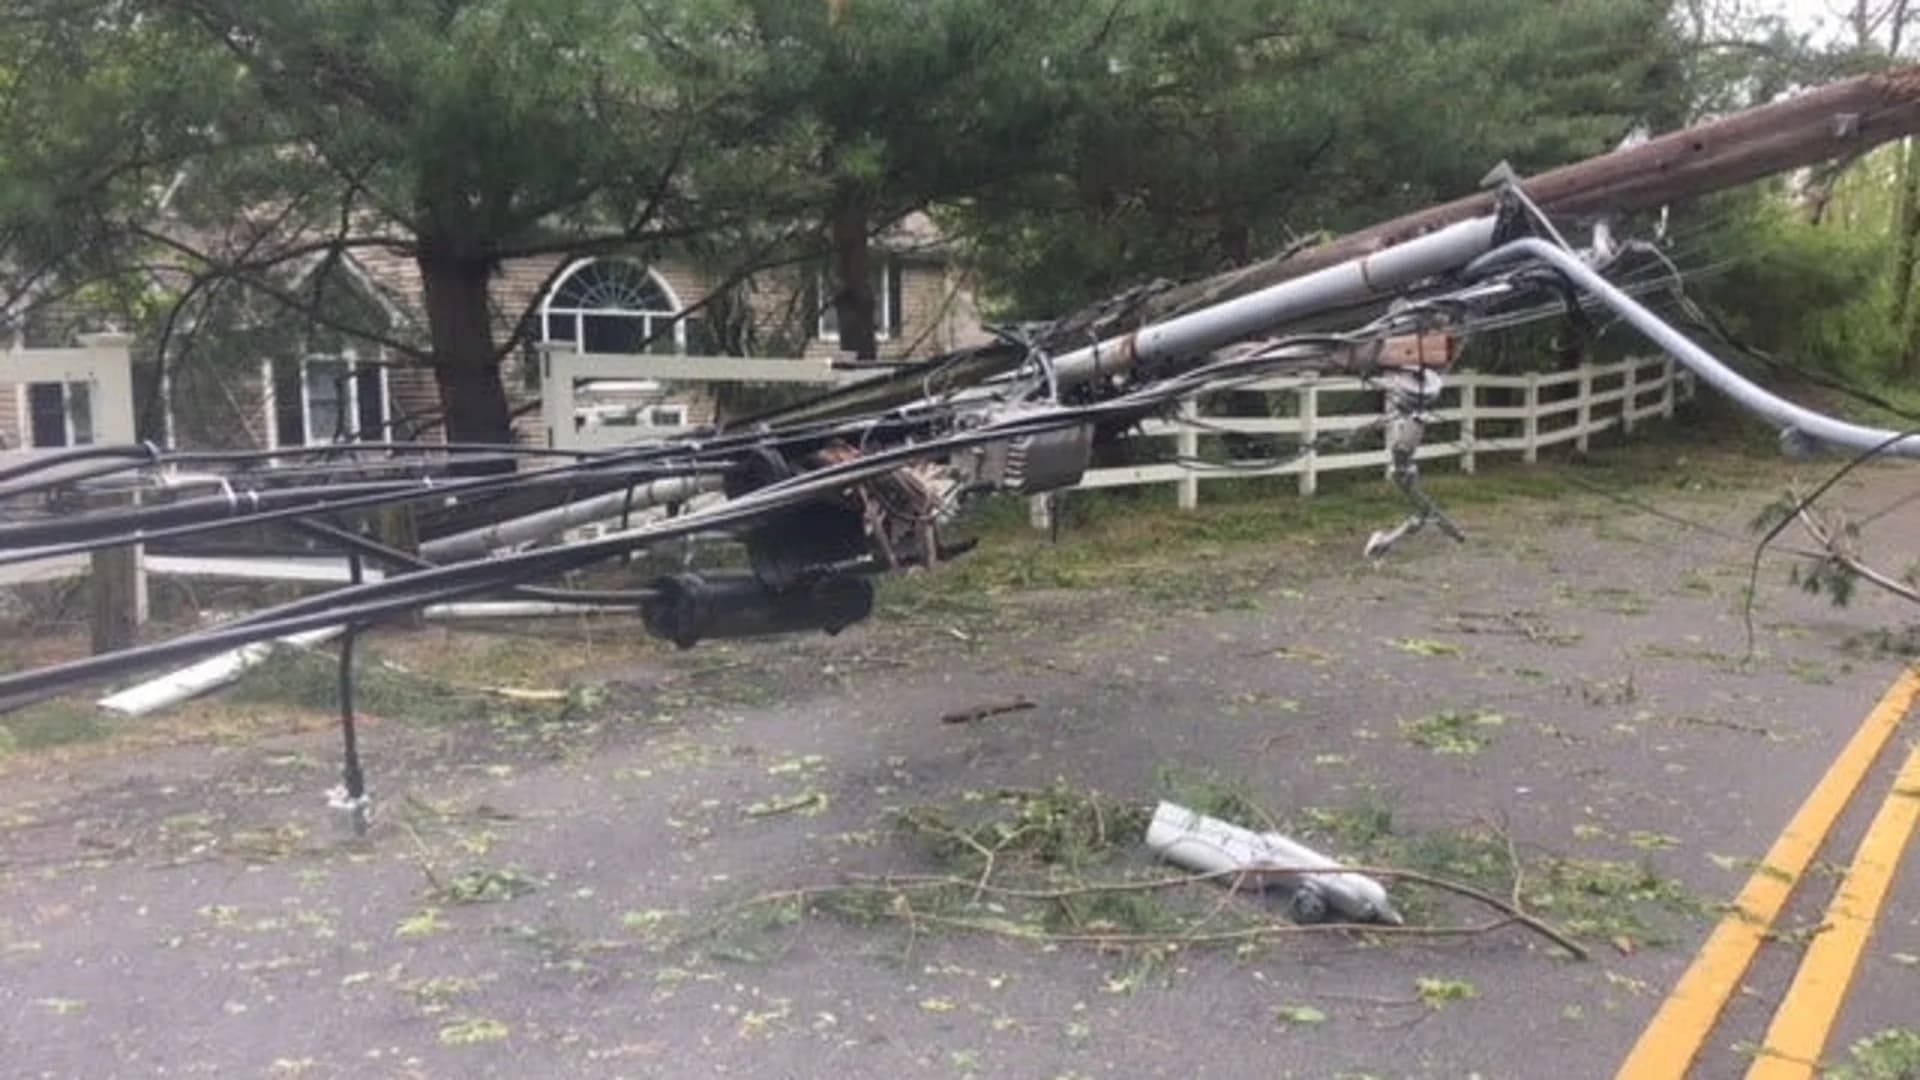 PHOTOS: Storm damage left behind in Connecticut